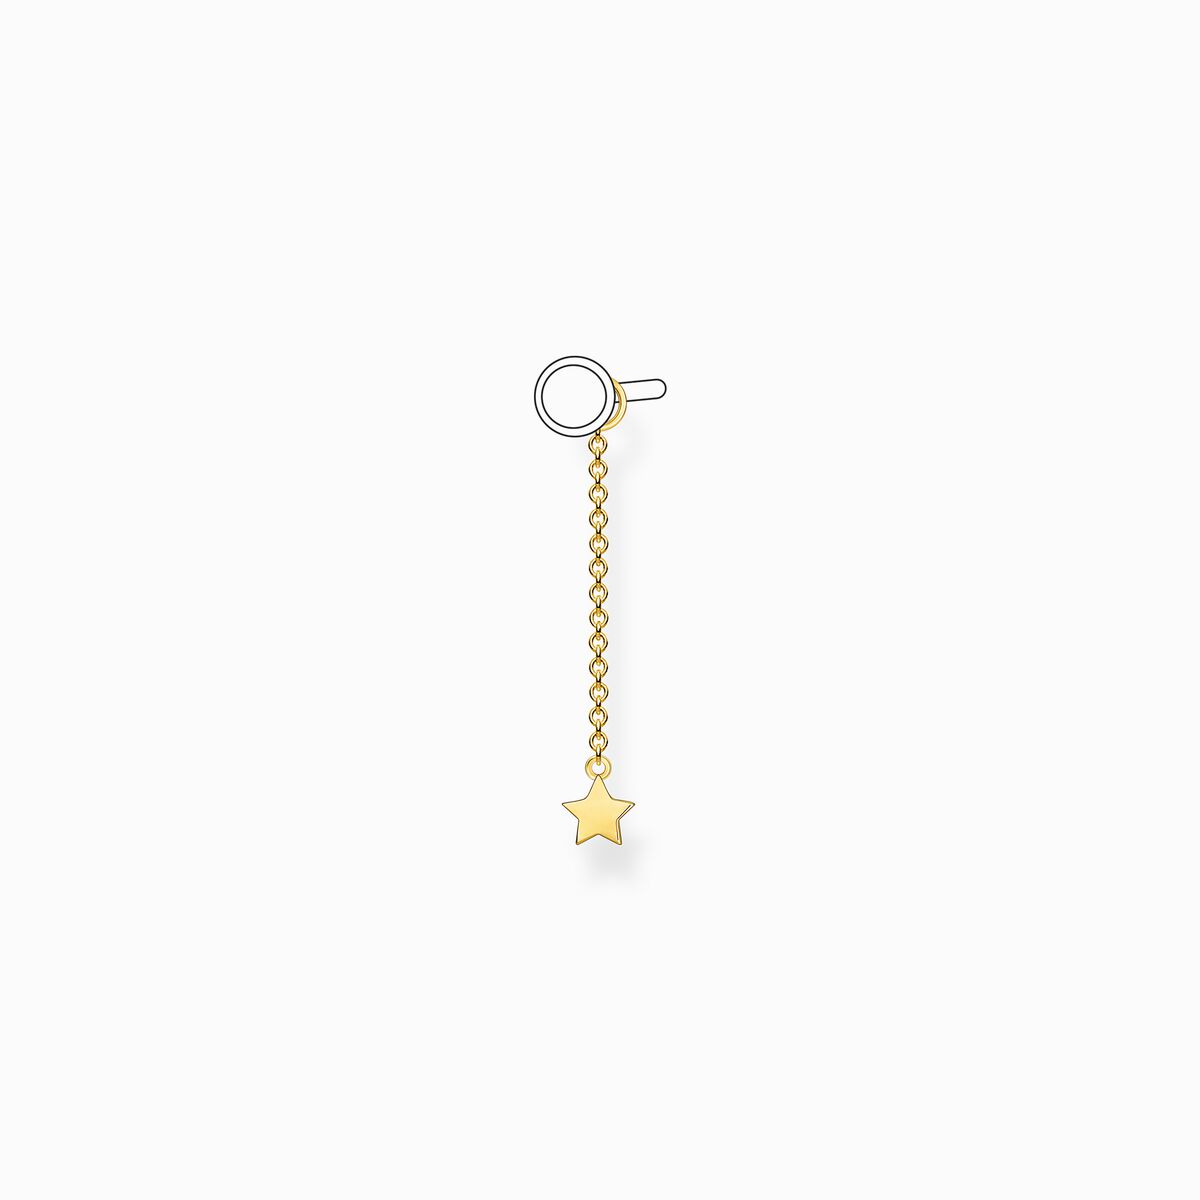 Golden earring pendant with SABO chain – THOMAS